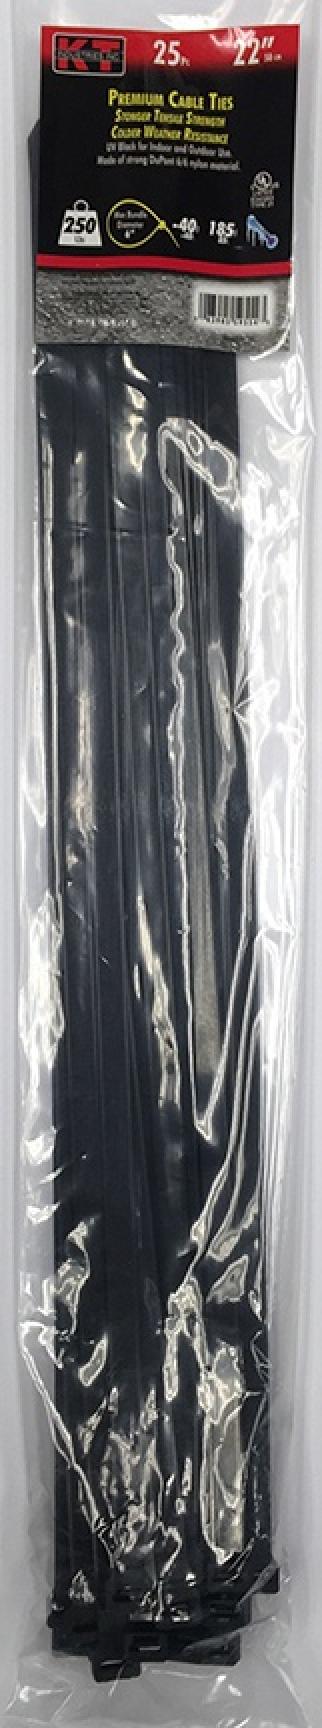 K-T Industries Super Heavy Duty Cable Ties